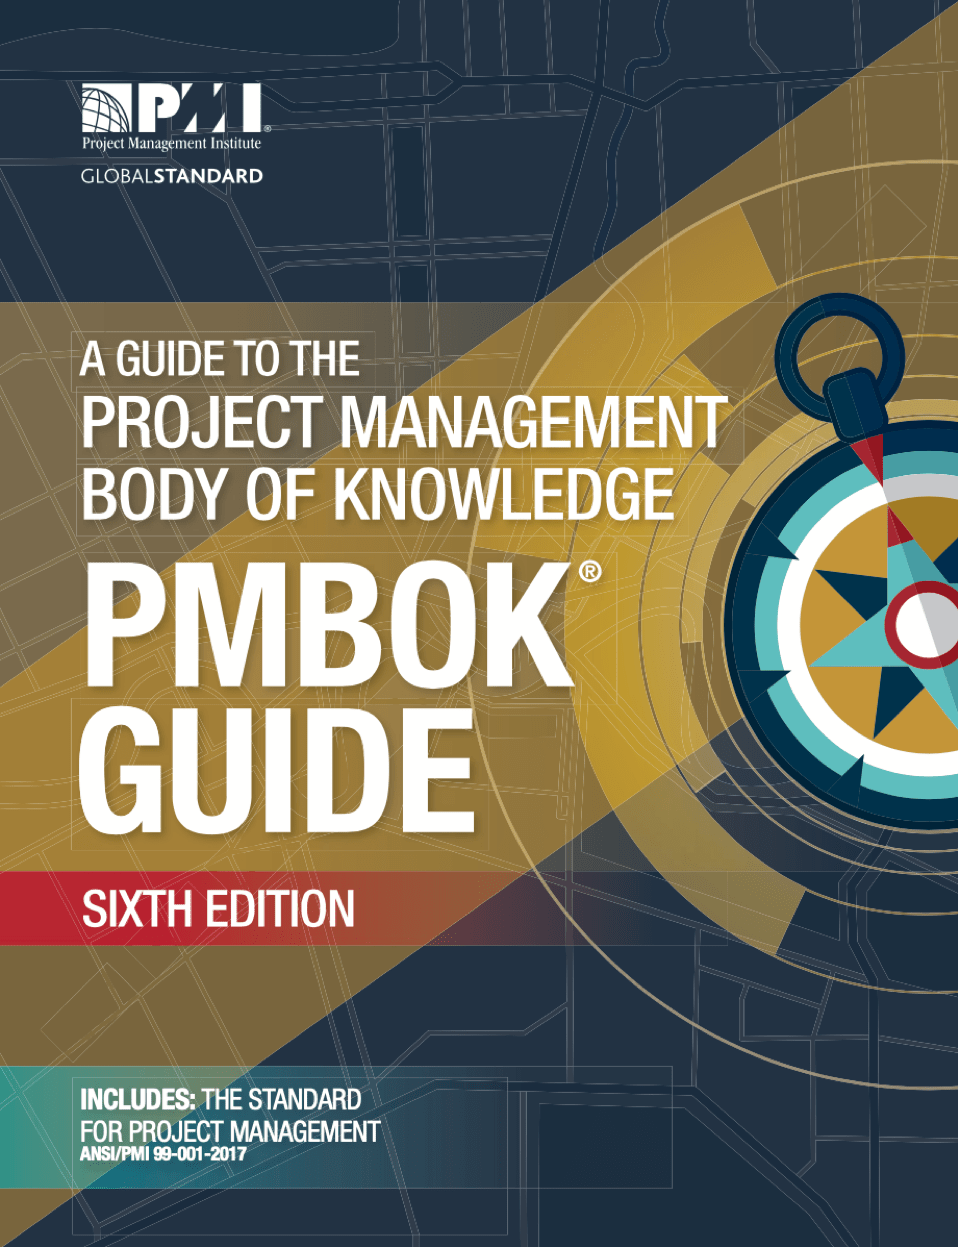 A Guide to the PROJECT MANAGEMENT BODY OF KNOWLEDGE read online at BusinessBooks.cc